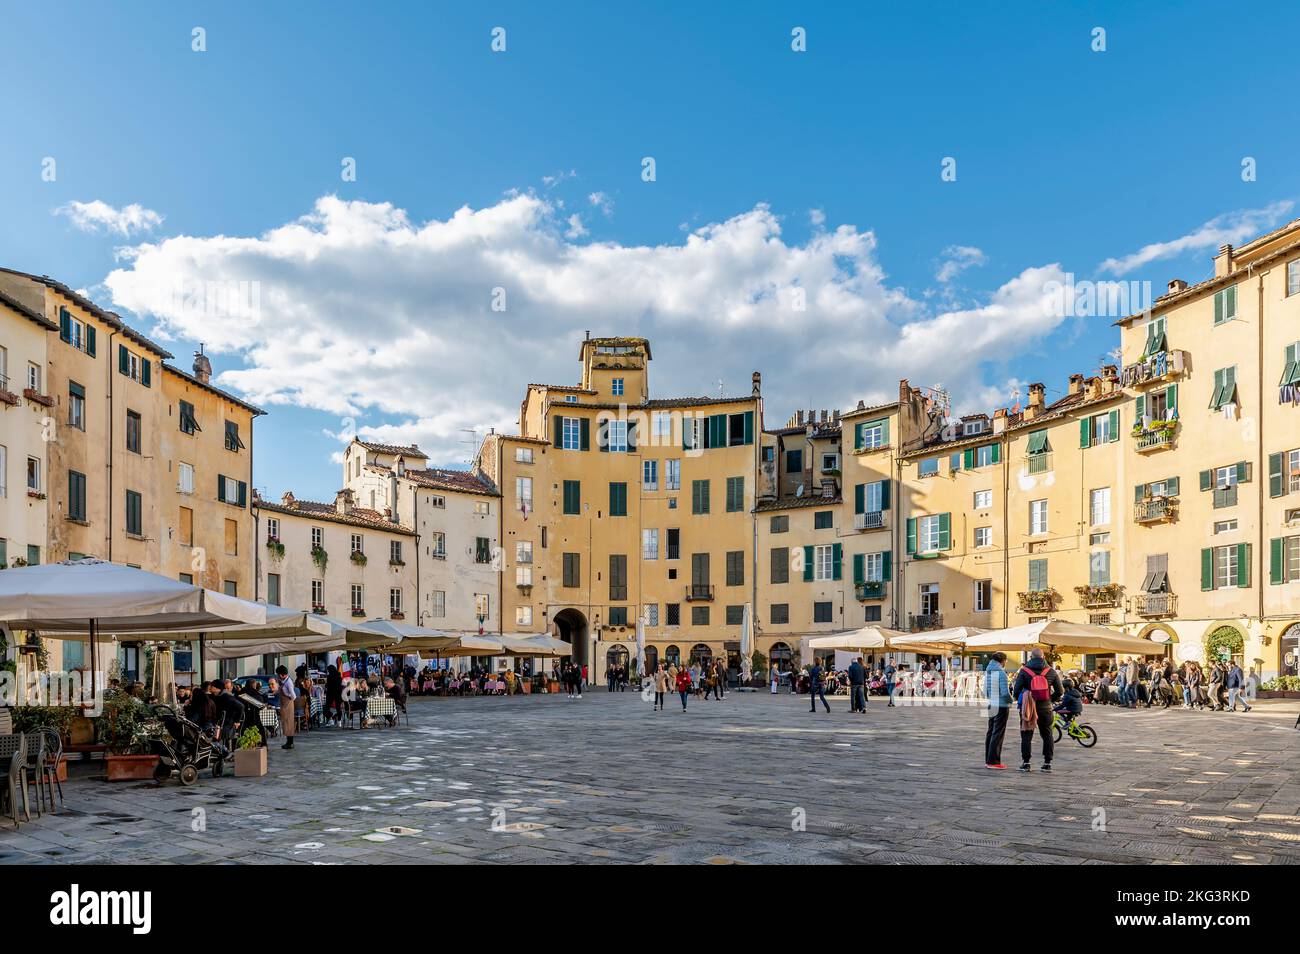 The central Piazza Anfiteatro square in Lucca, Italy, on a sunny day Stock Photo